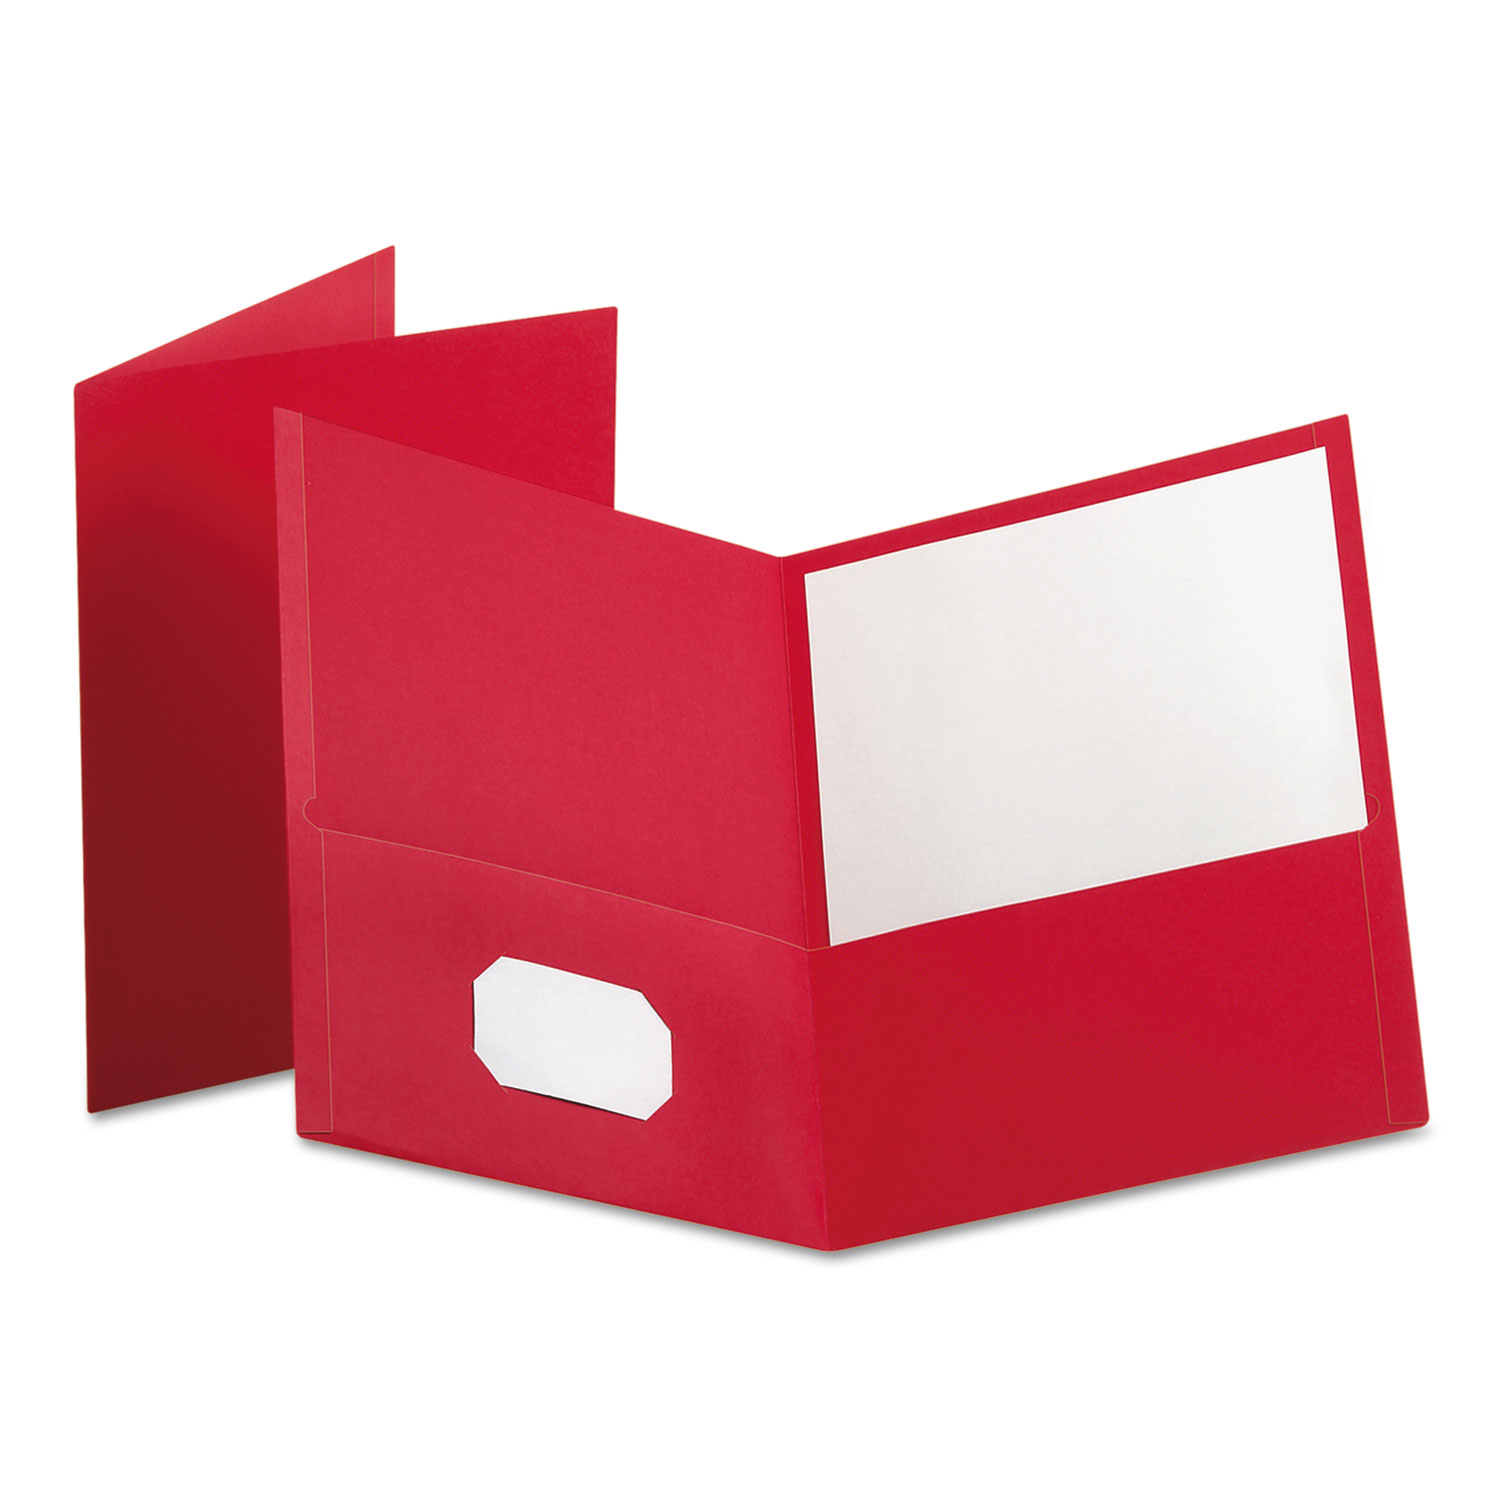 Twin-Pocket Folder, Embossed Leather Grain Paper, Red, 25/Box